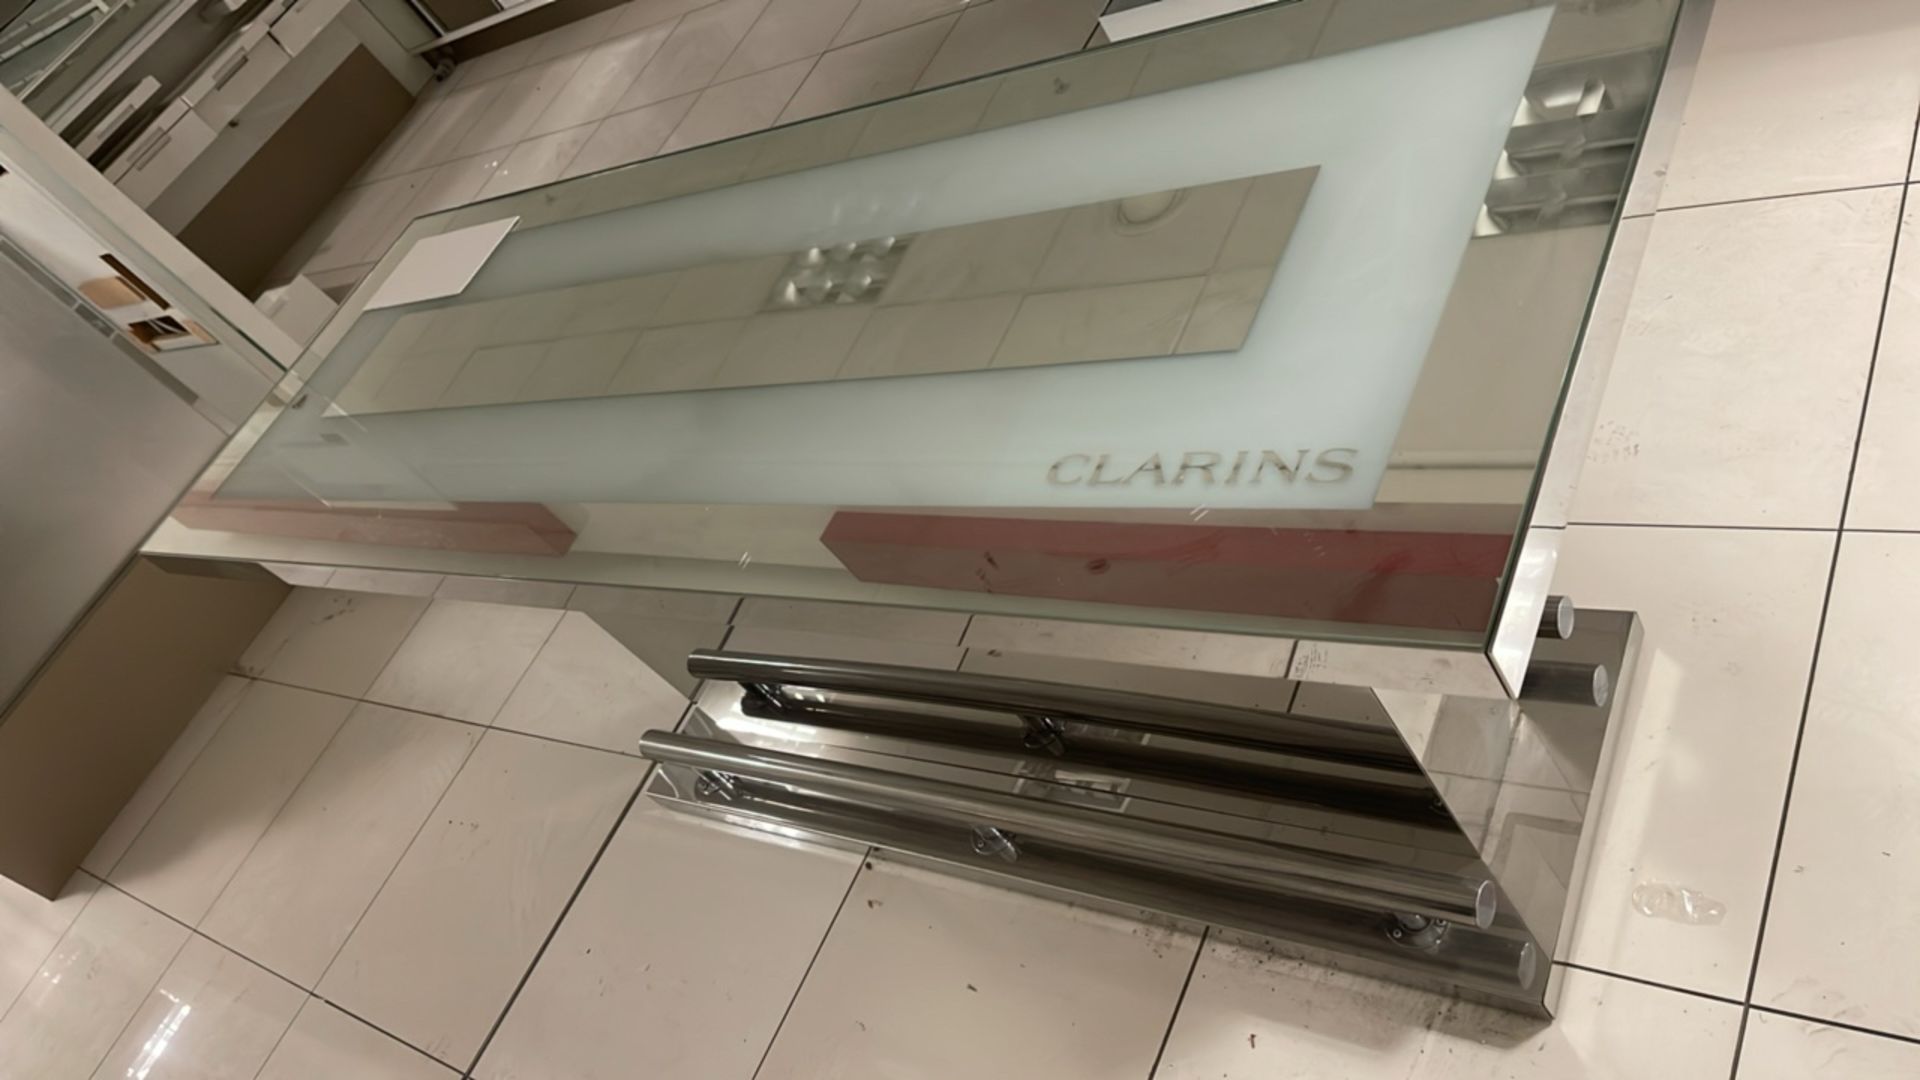 Clarins Mirrored Table - Image 2 of 4